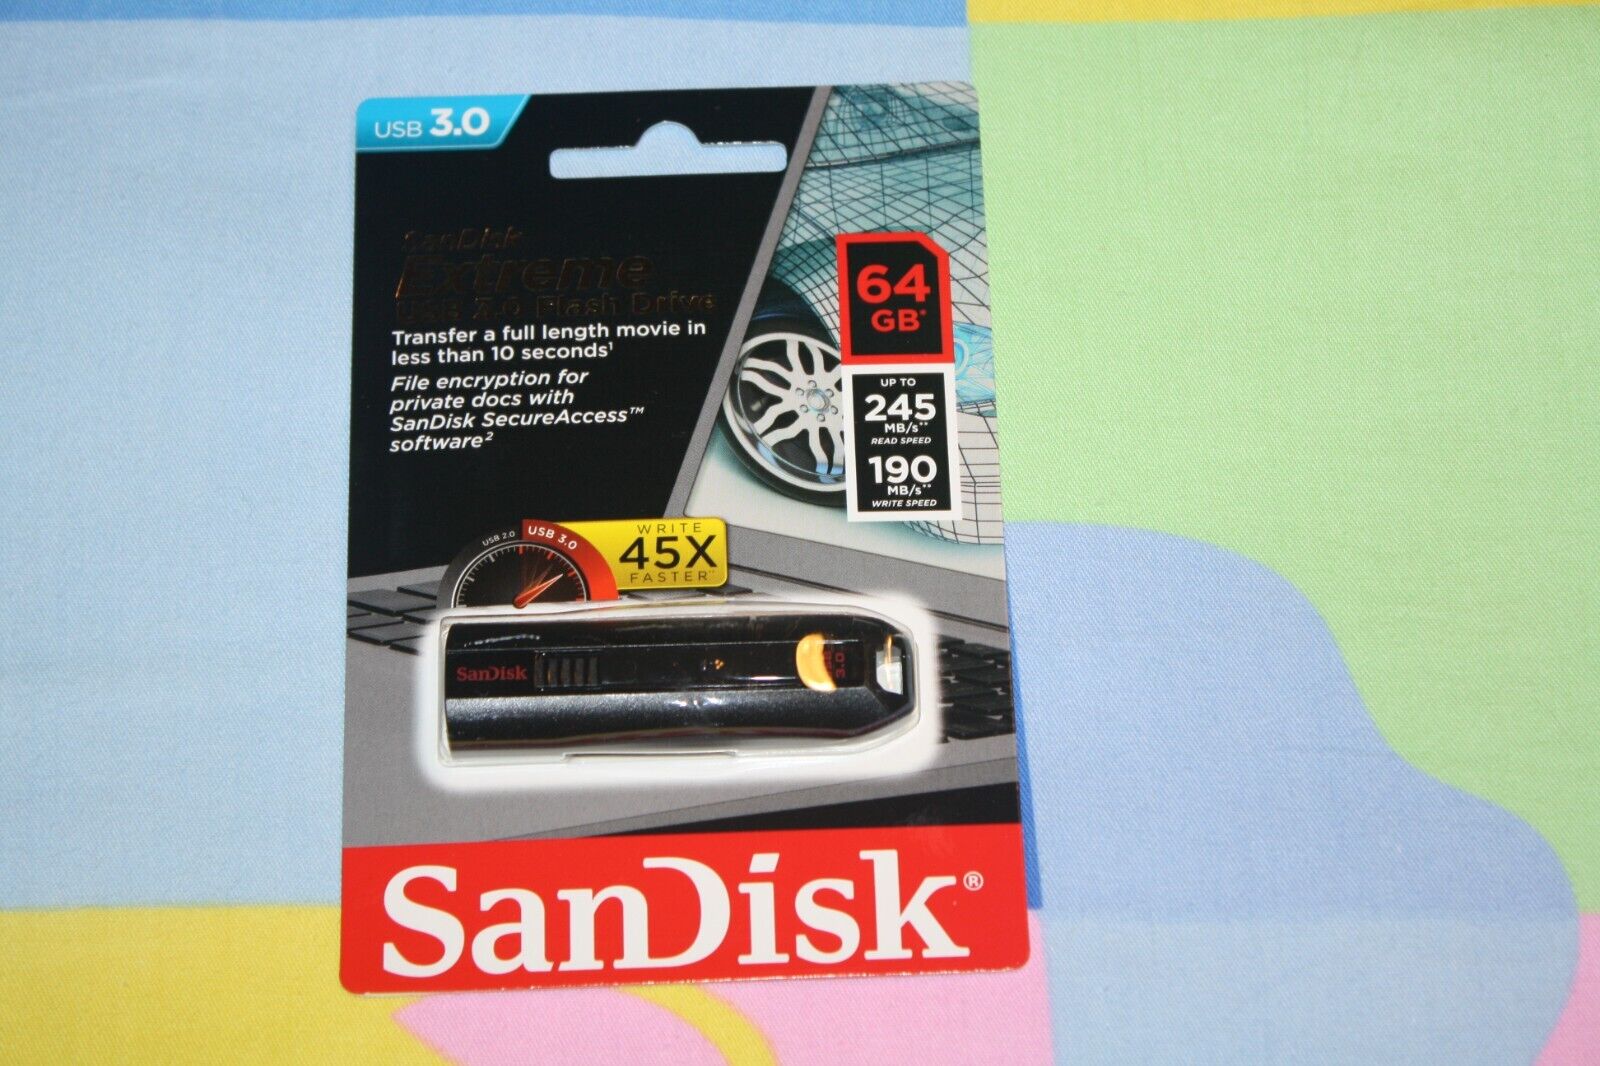 BRAND NEW SanDisk Extreme 64GB USB 3.0 Flash Drive With Speed Up To 190MB/s